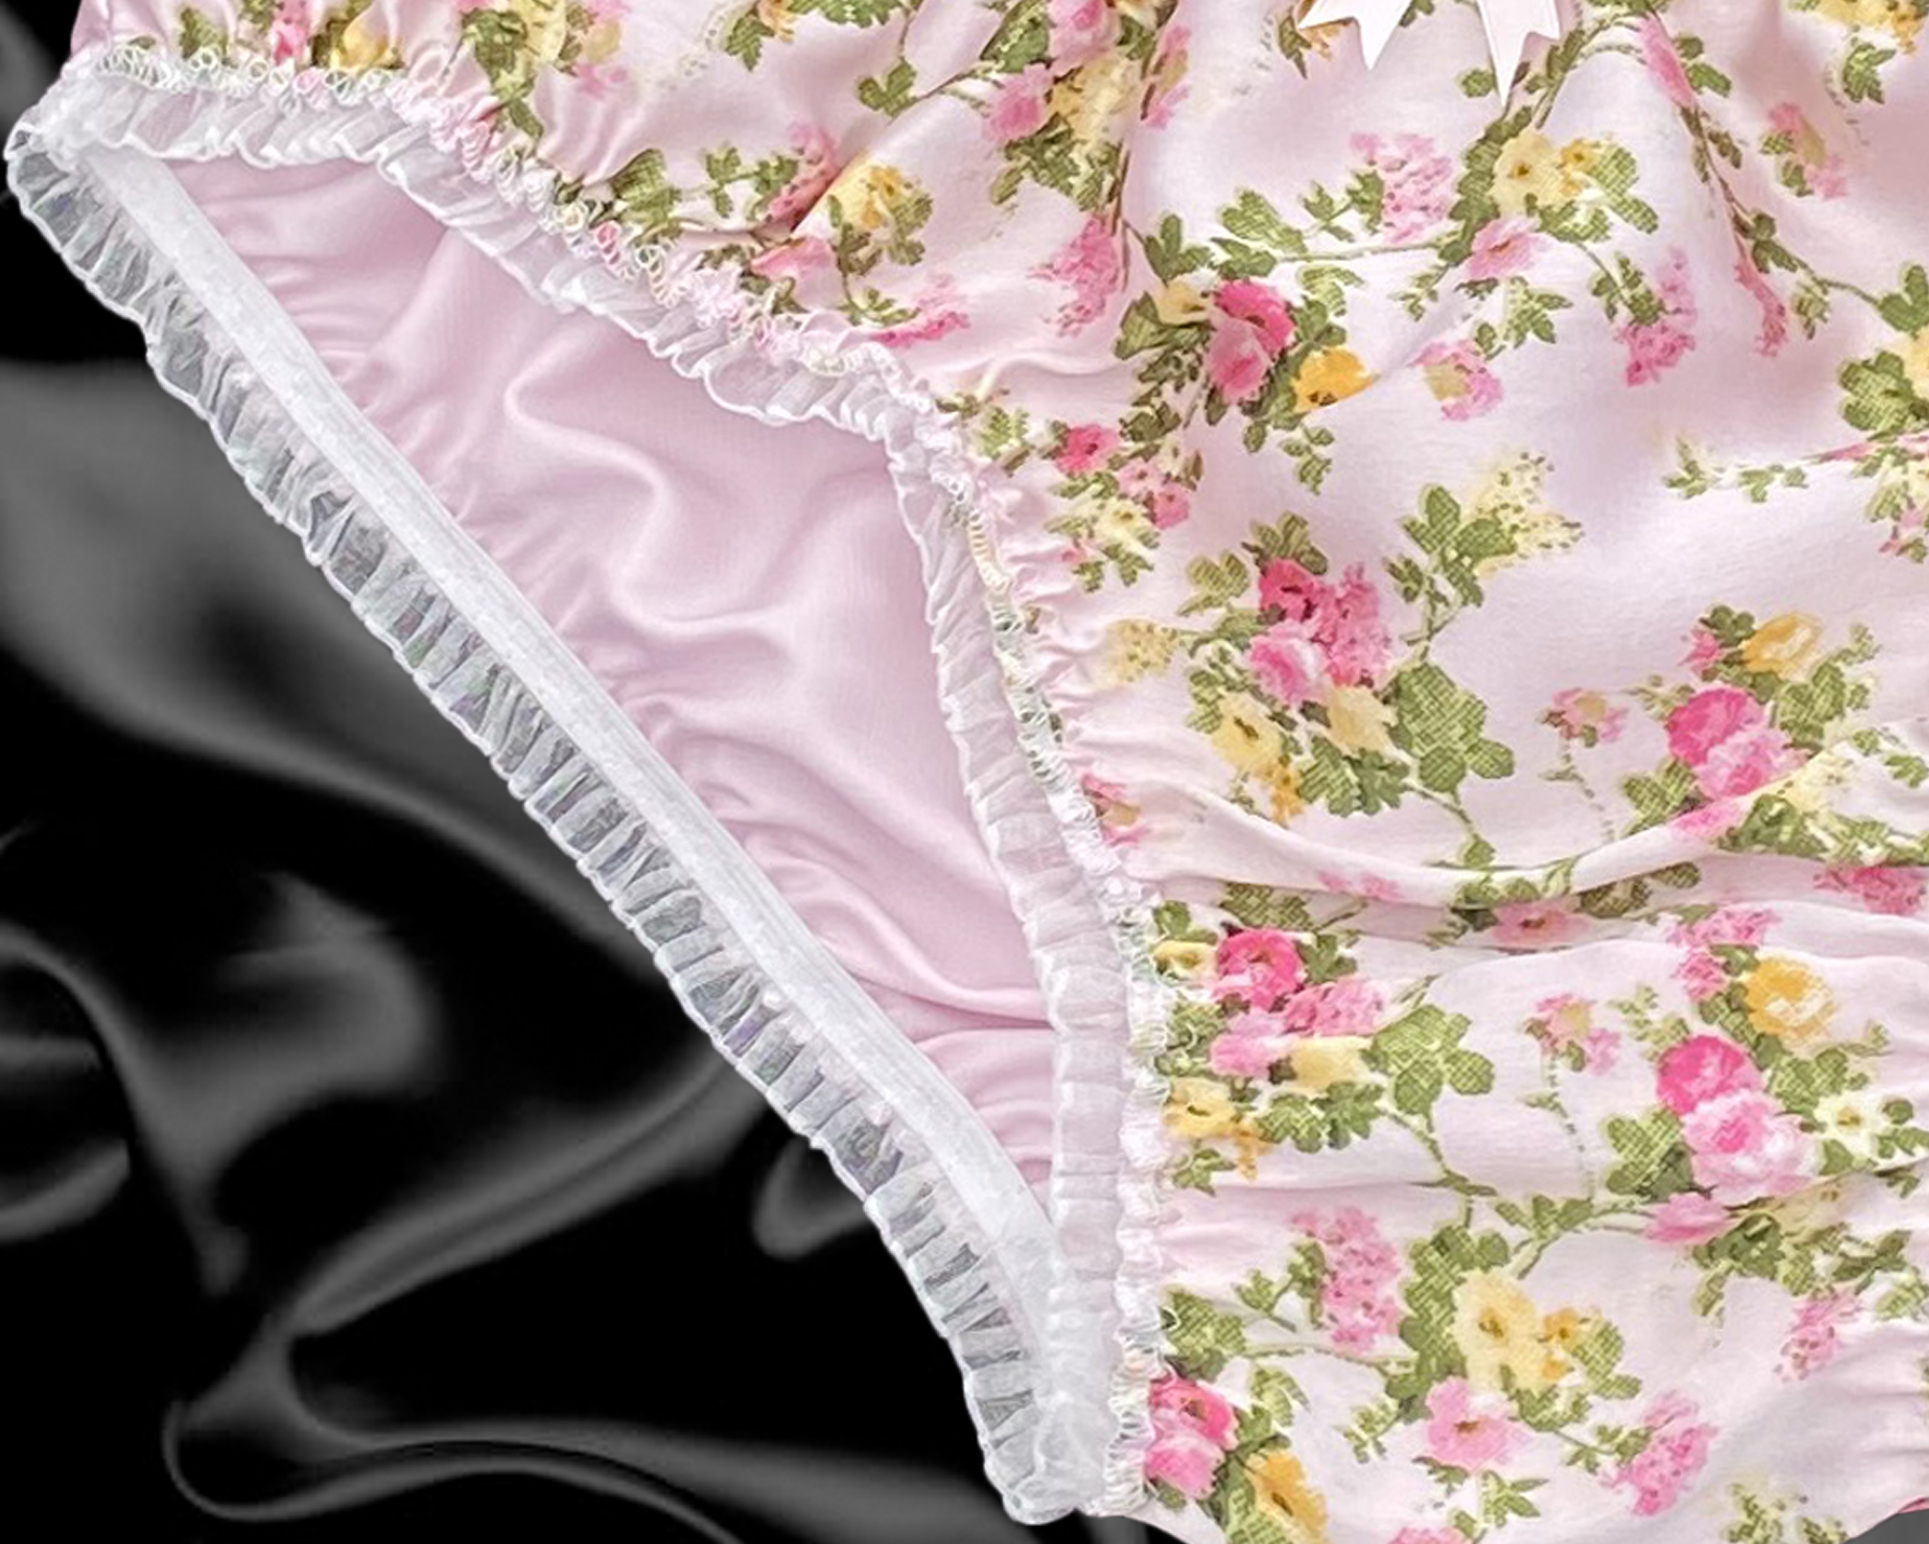 Satin Floral Frilly Lace Sissy Bikini Knickers Briefs Full Panties Size 10  - 20